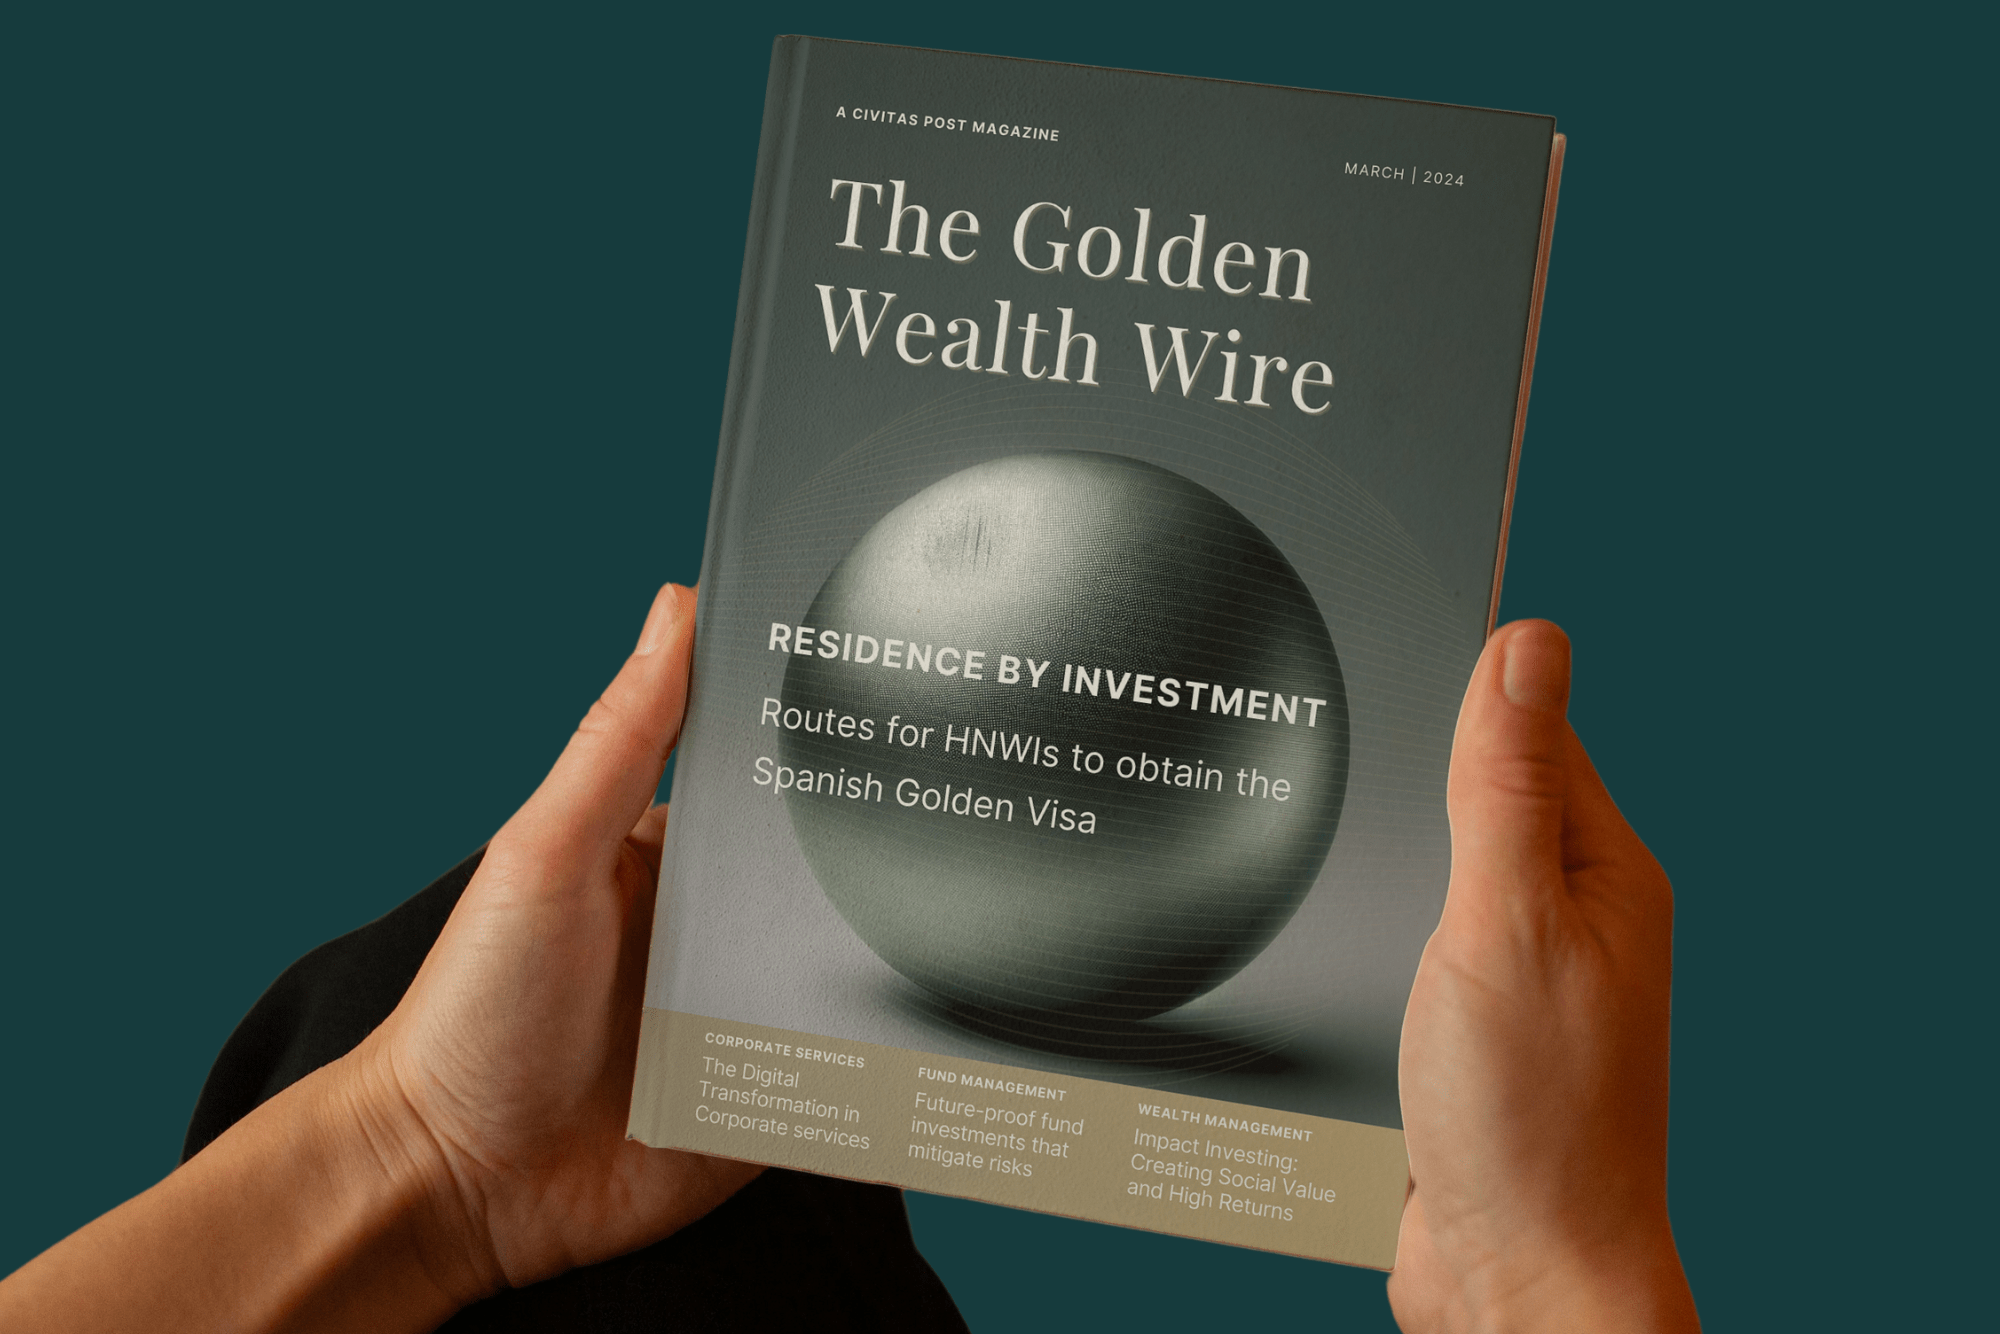 The Golden Wealth Wire